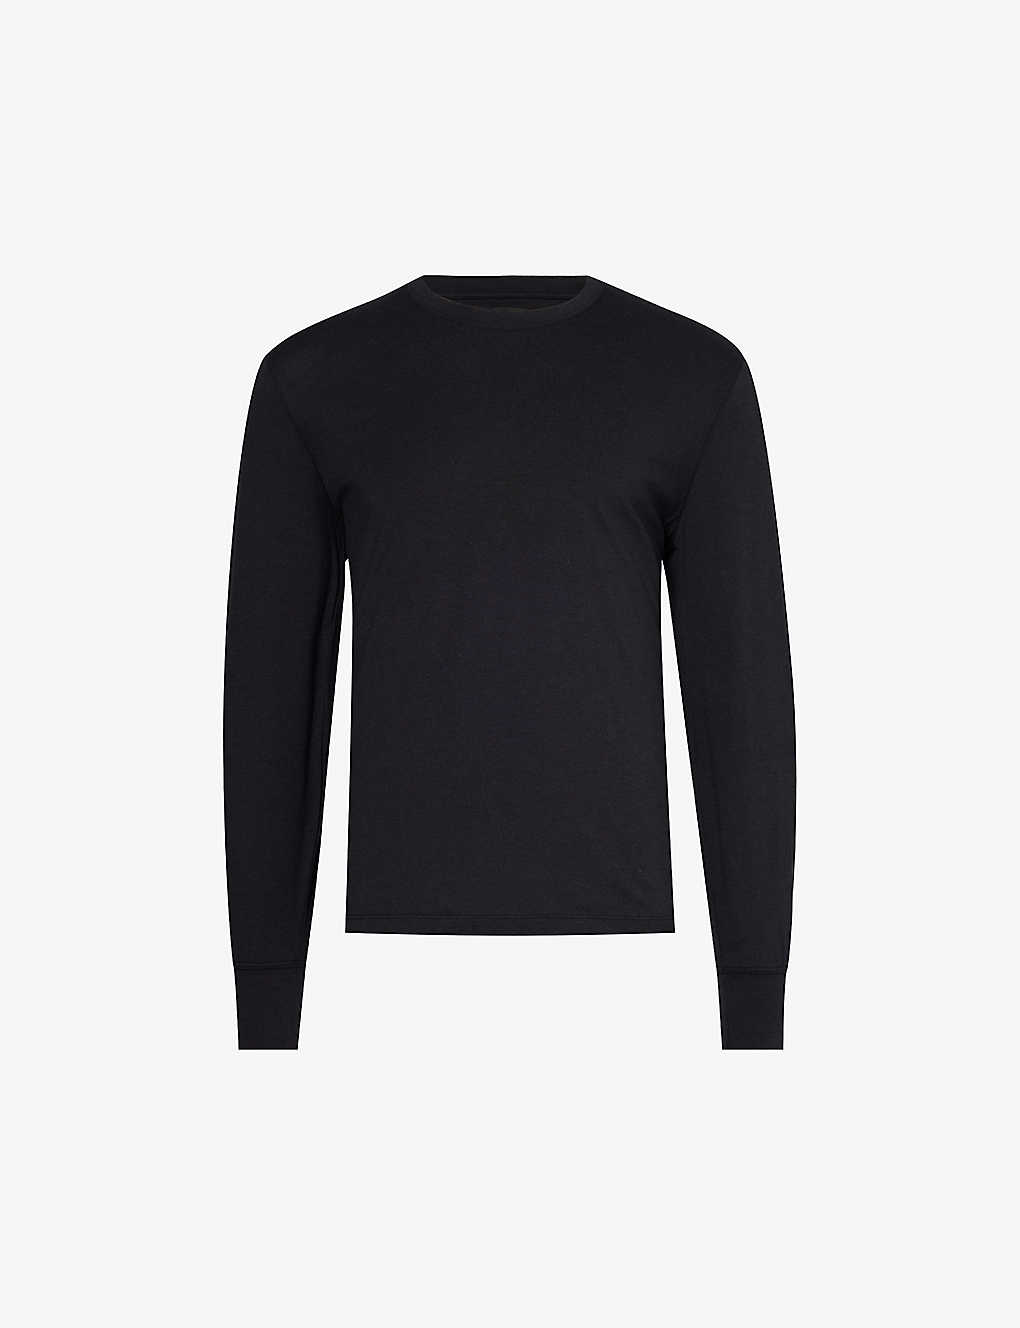 Tom Ford Brand-embroidered Crewneck Woven Sweatshirt In Black